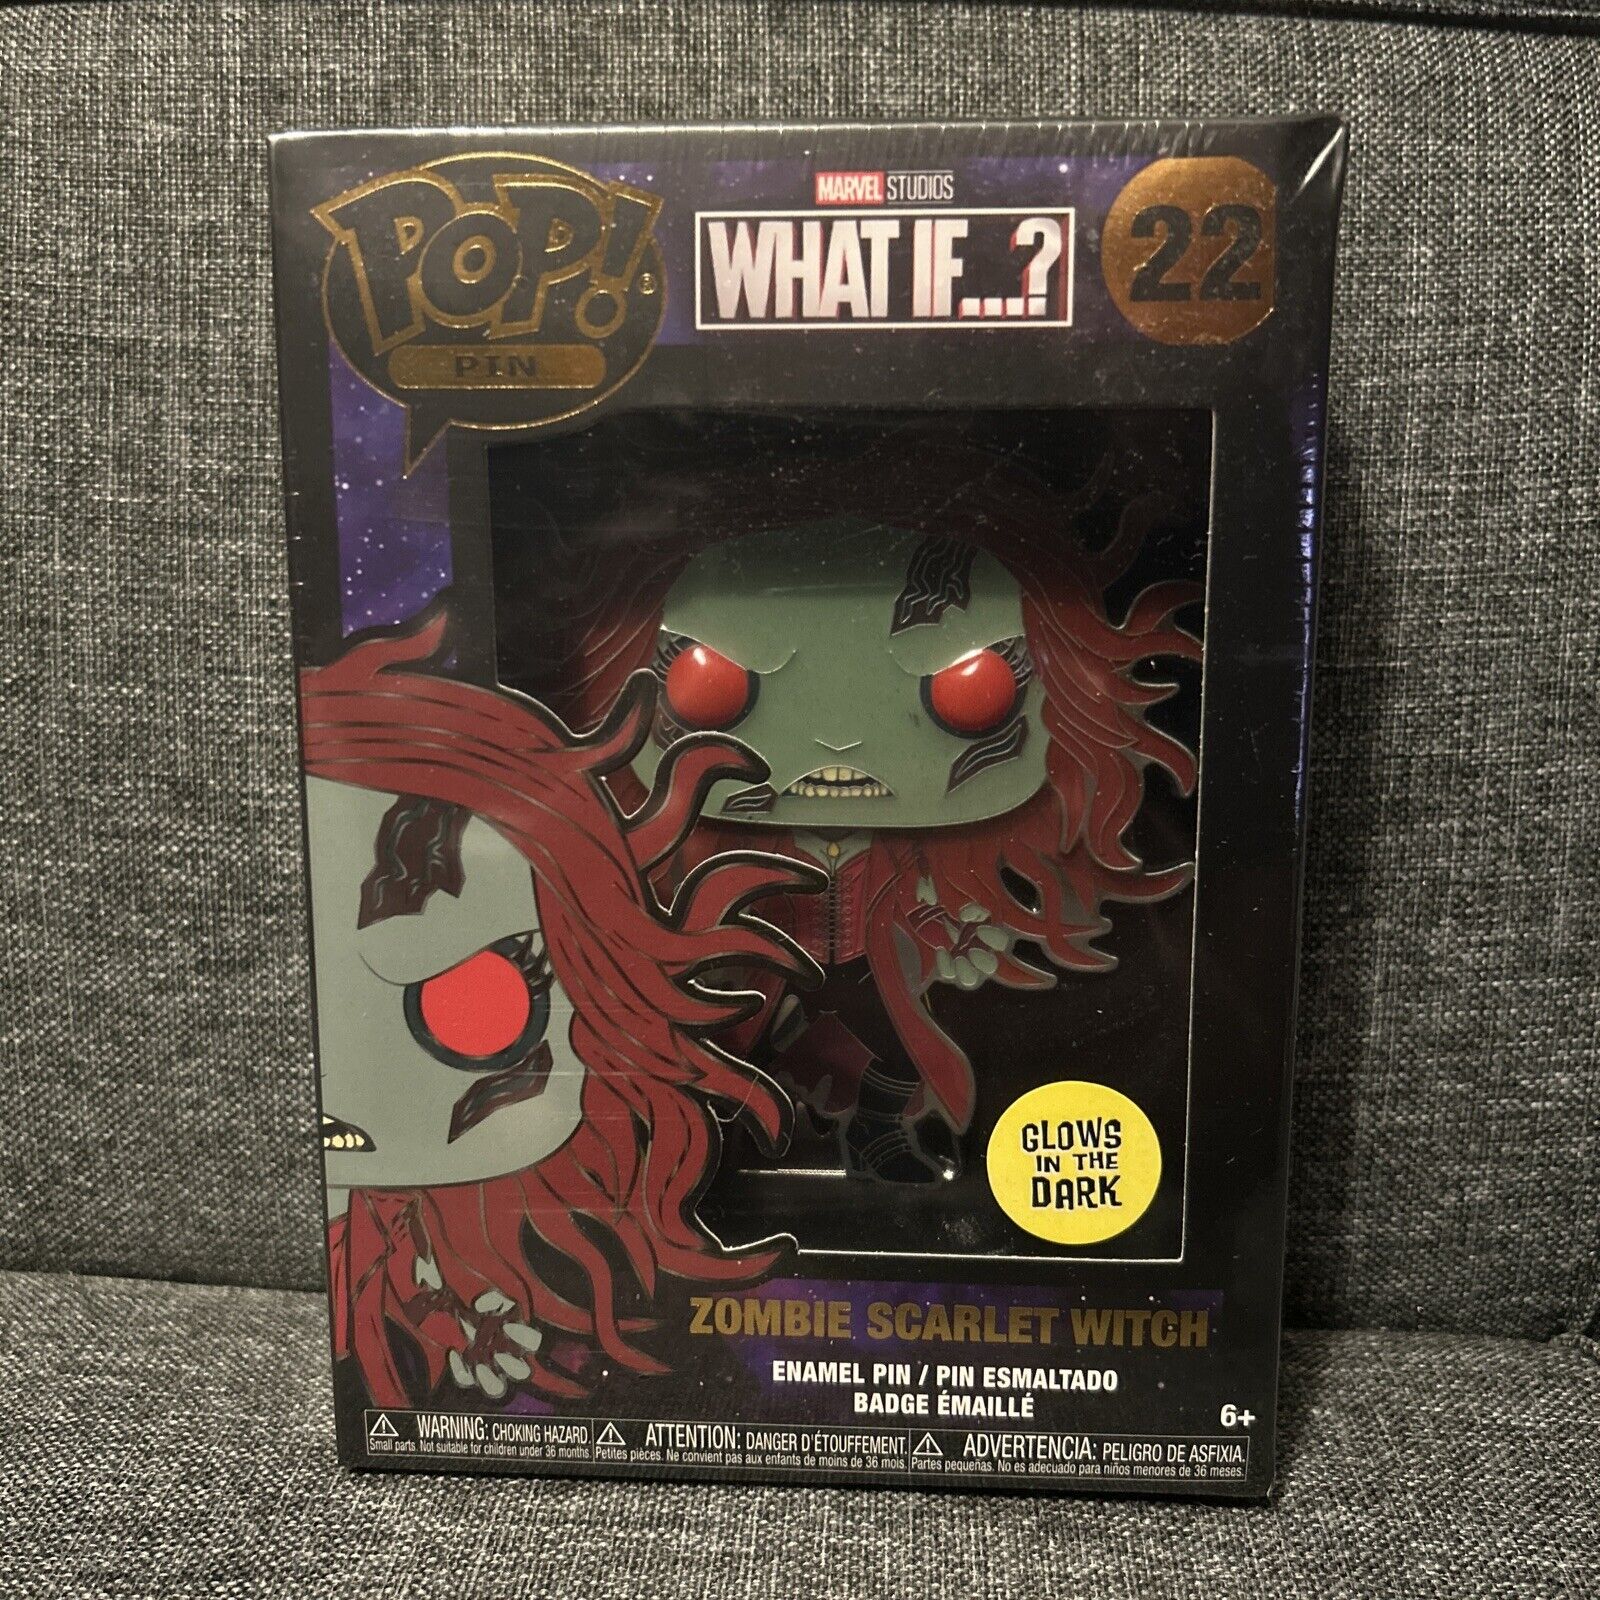 NEW SEALED Funko Pop Pin What If...? Zombie Scarlet Witch 22 Marvel X-men